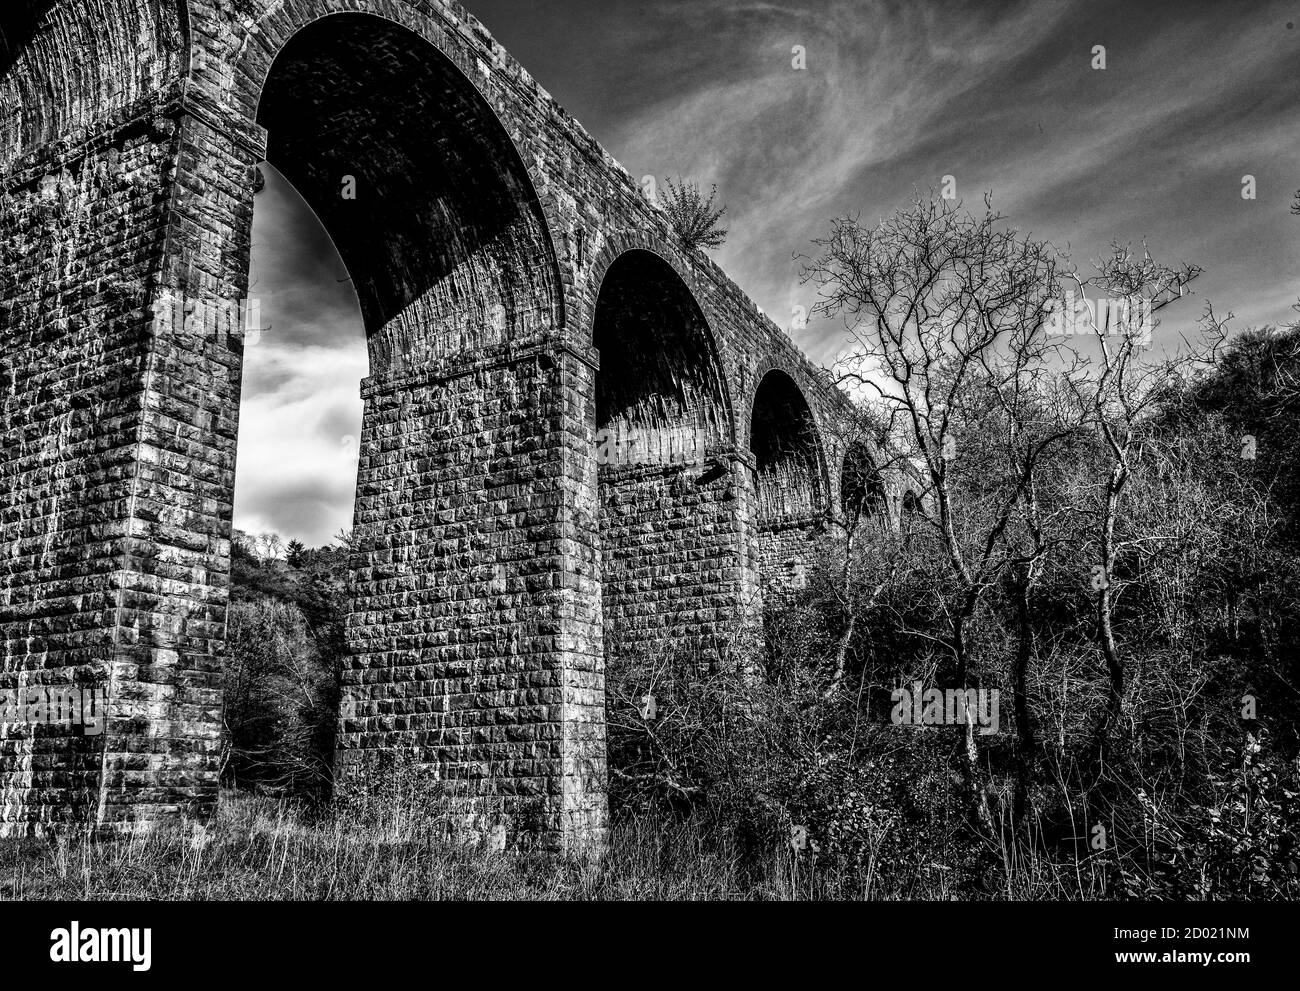 Pontsarn Viaduct, now disused, but previously was the railwat bridge that carried the trains over to and beyond Merthyr Tydfil from Brecon and beyond,. Stock Photo